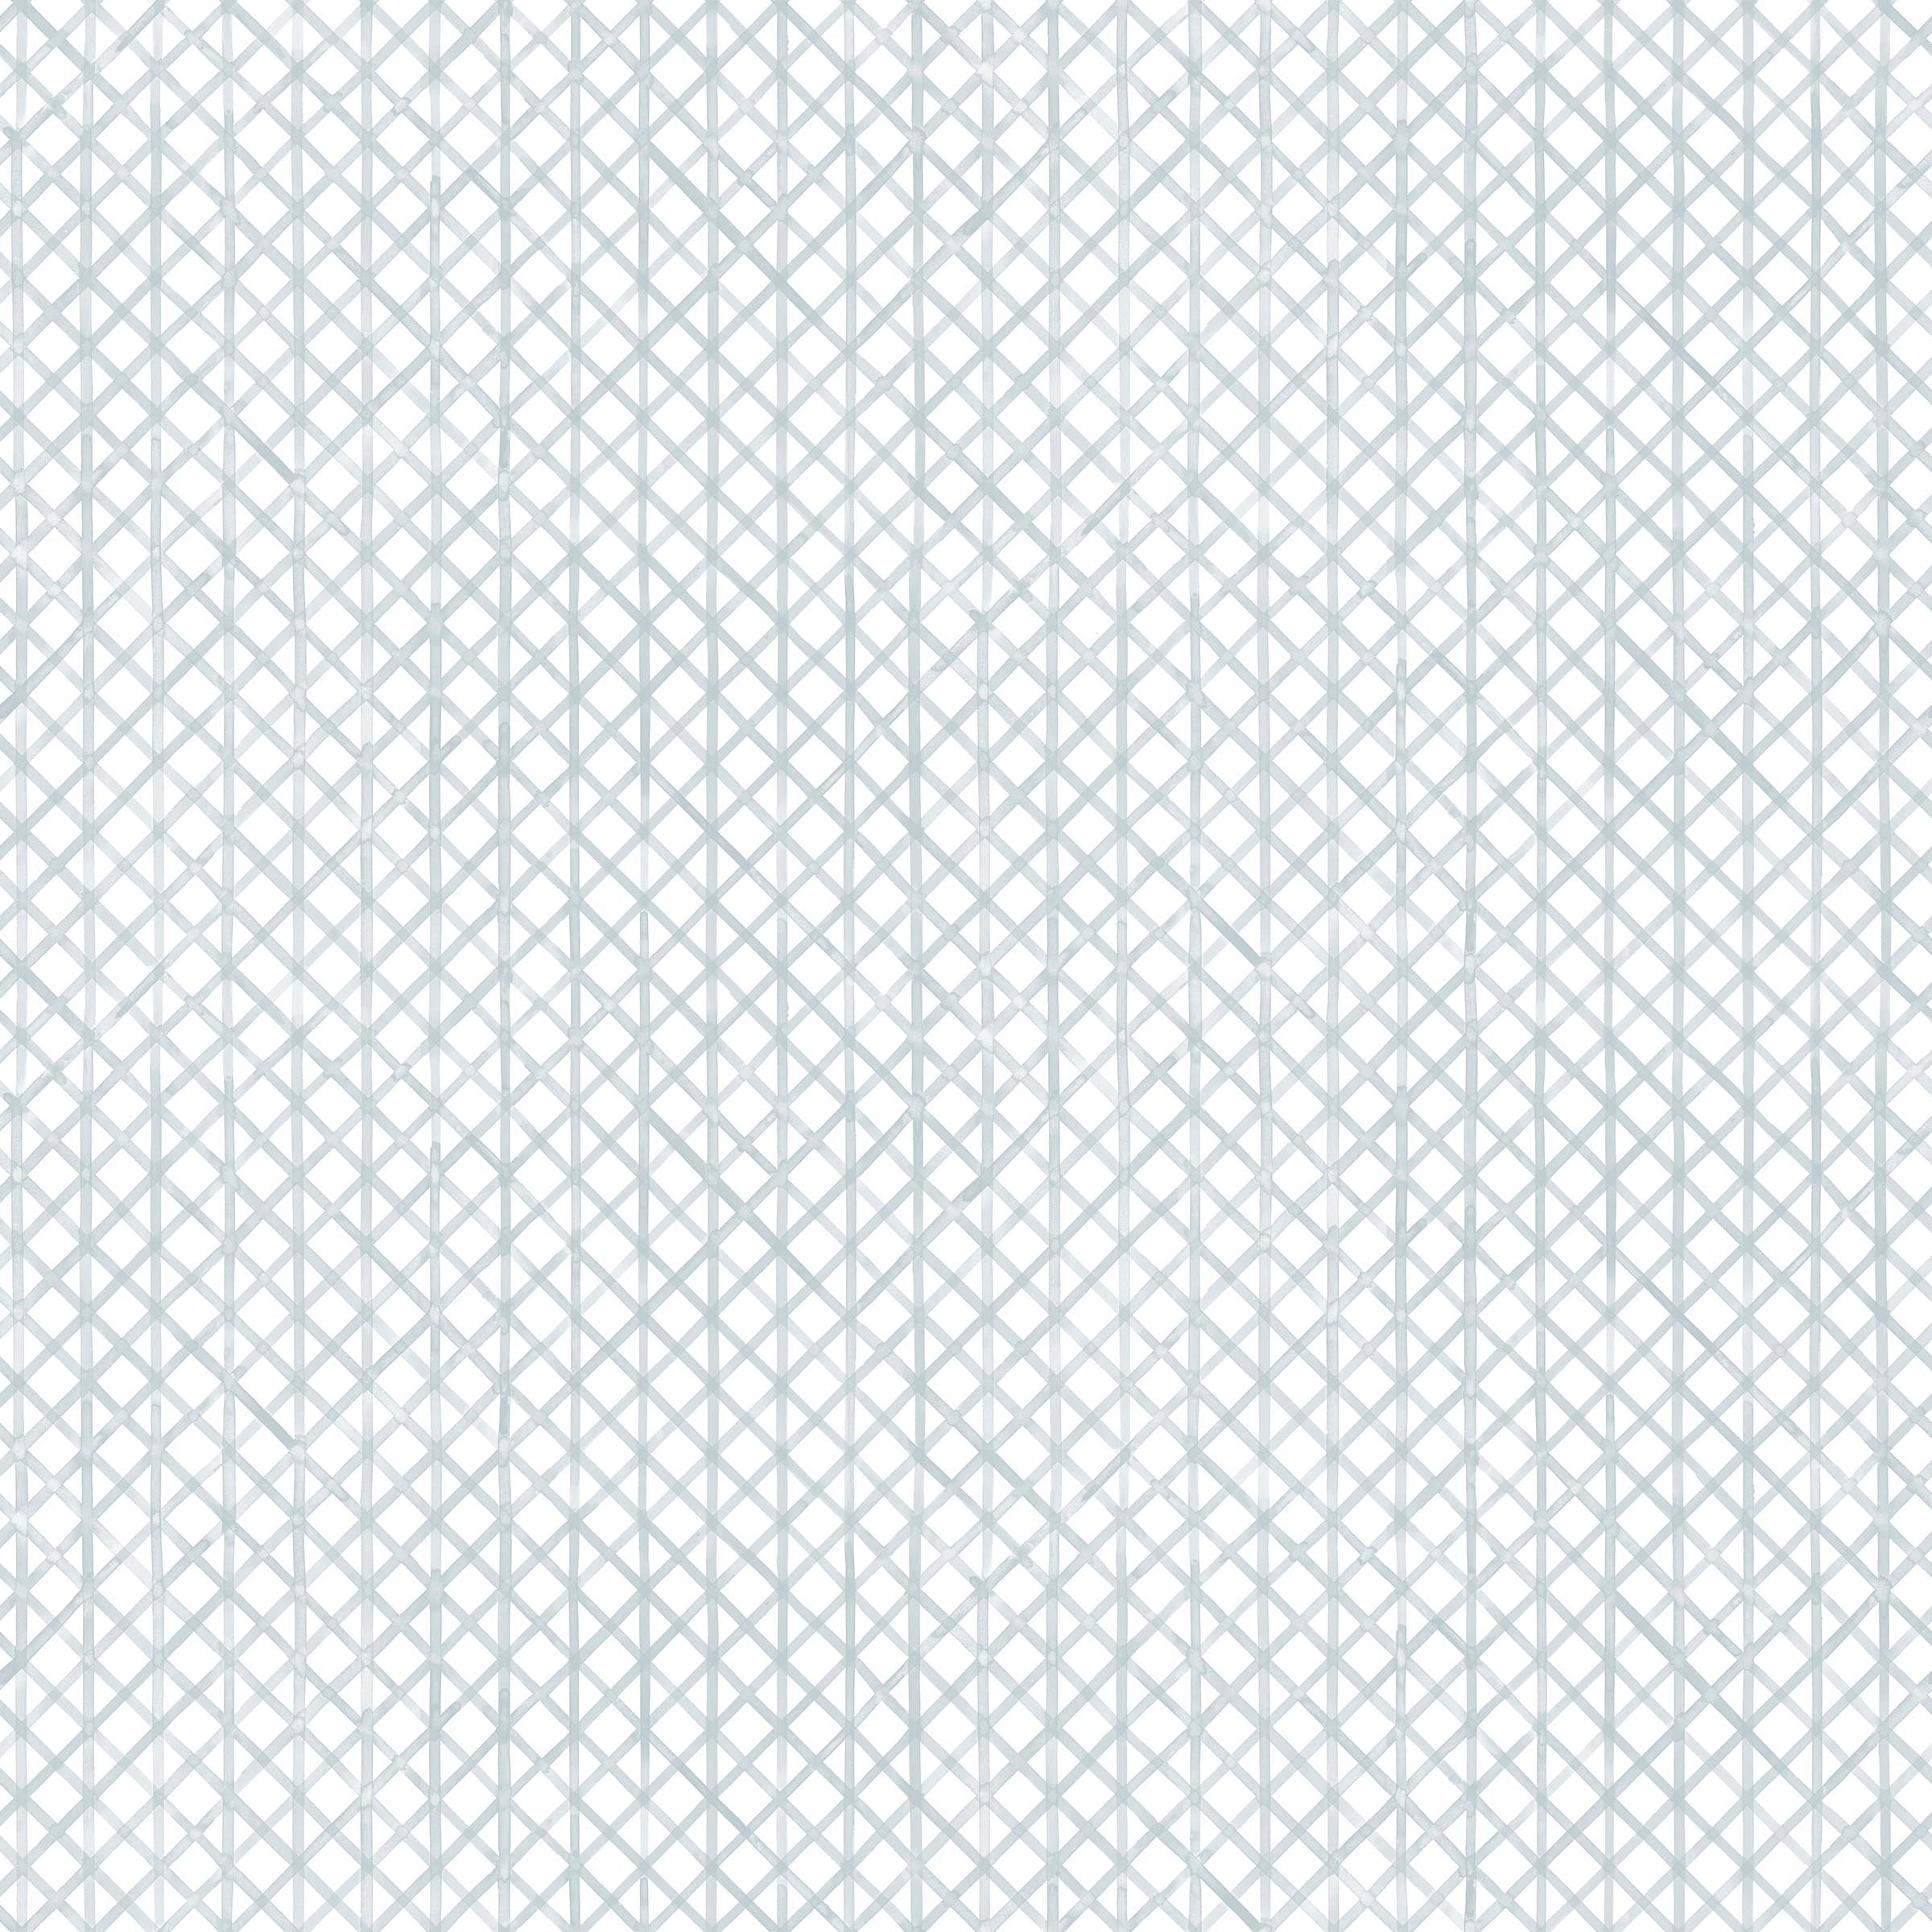 Detail of fabric in an intricate striped grid pattern in light blue on a white field.